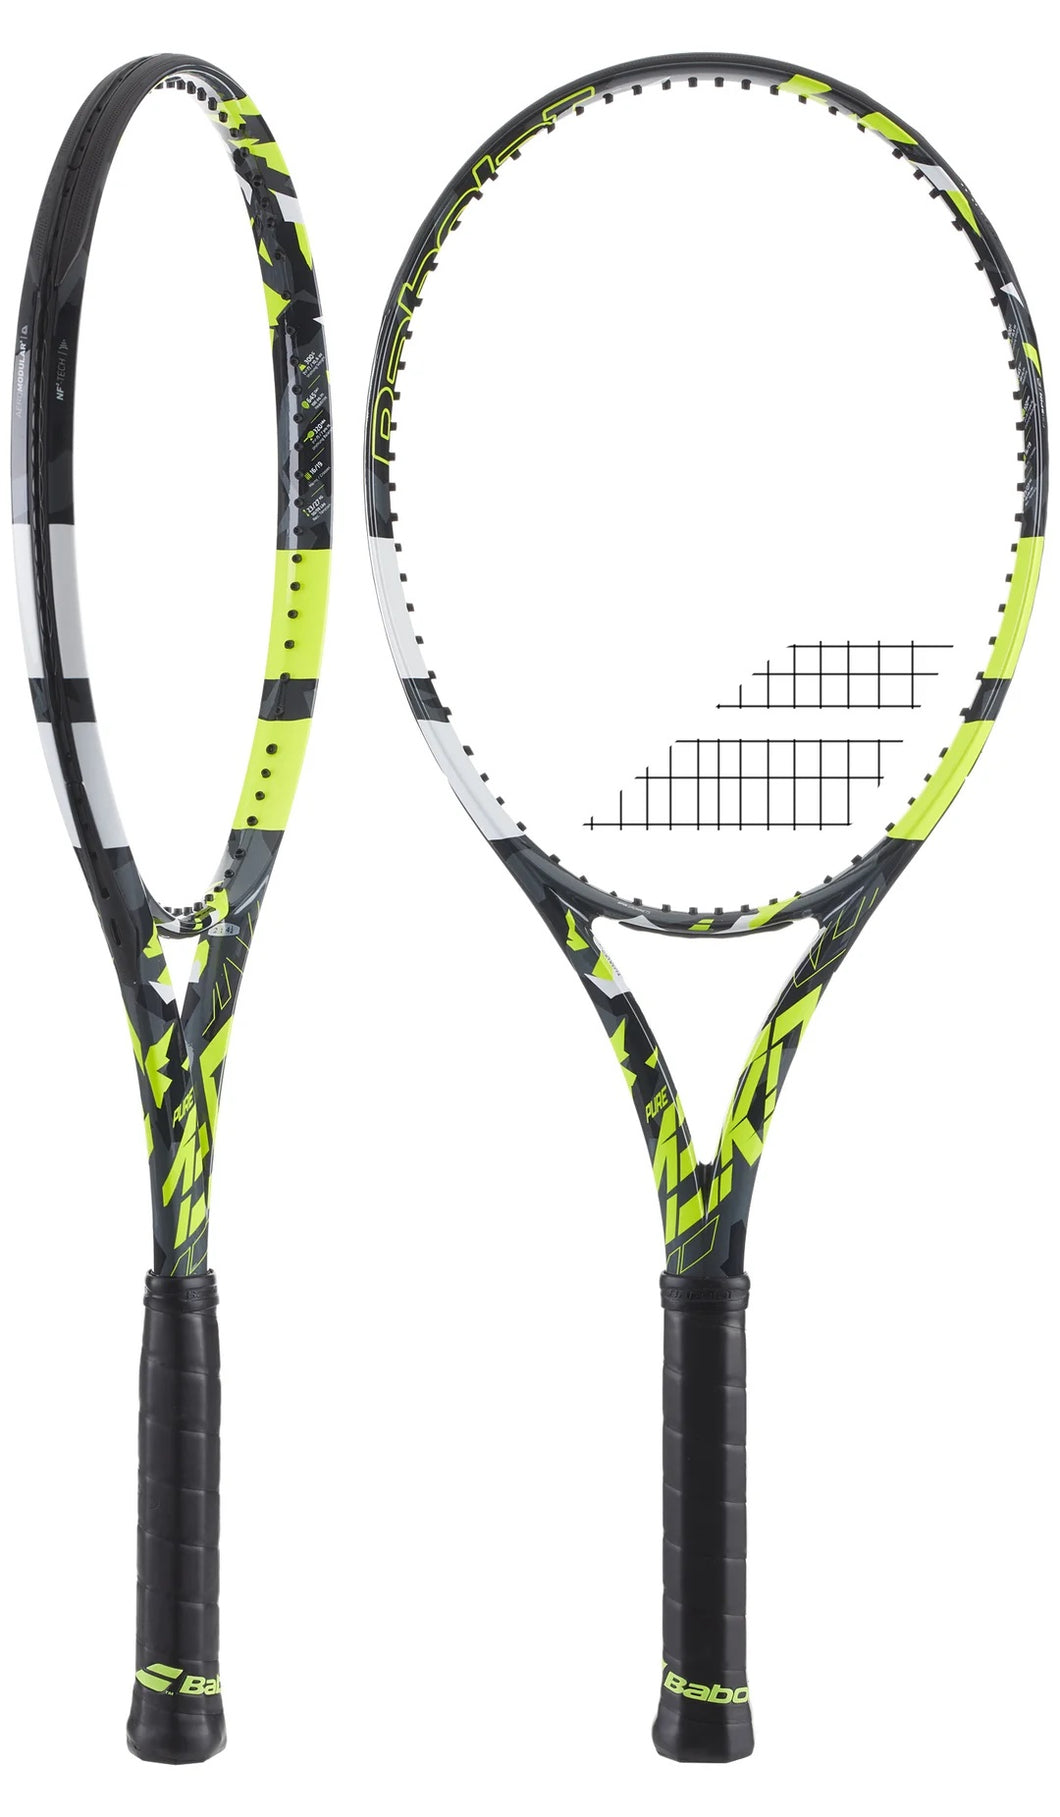 The 7th generation Babolat Pure Aero tennis racquet evolves with a unique approach engineered around the spin in your game.